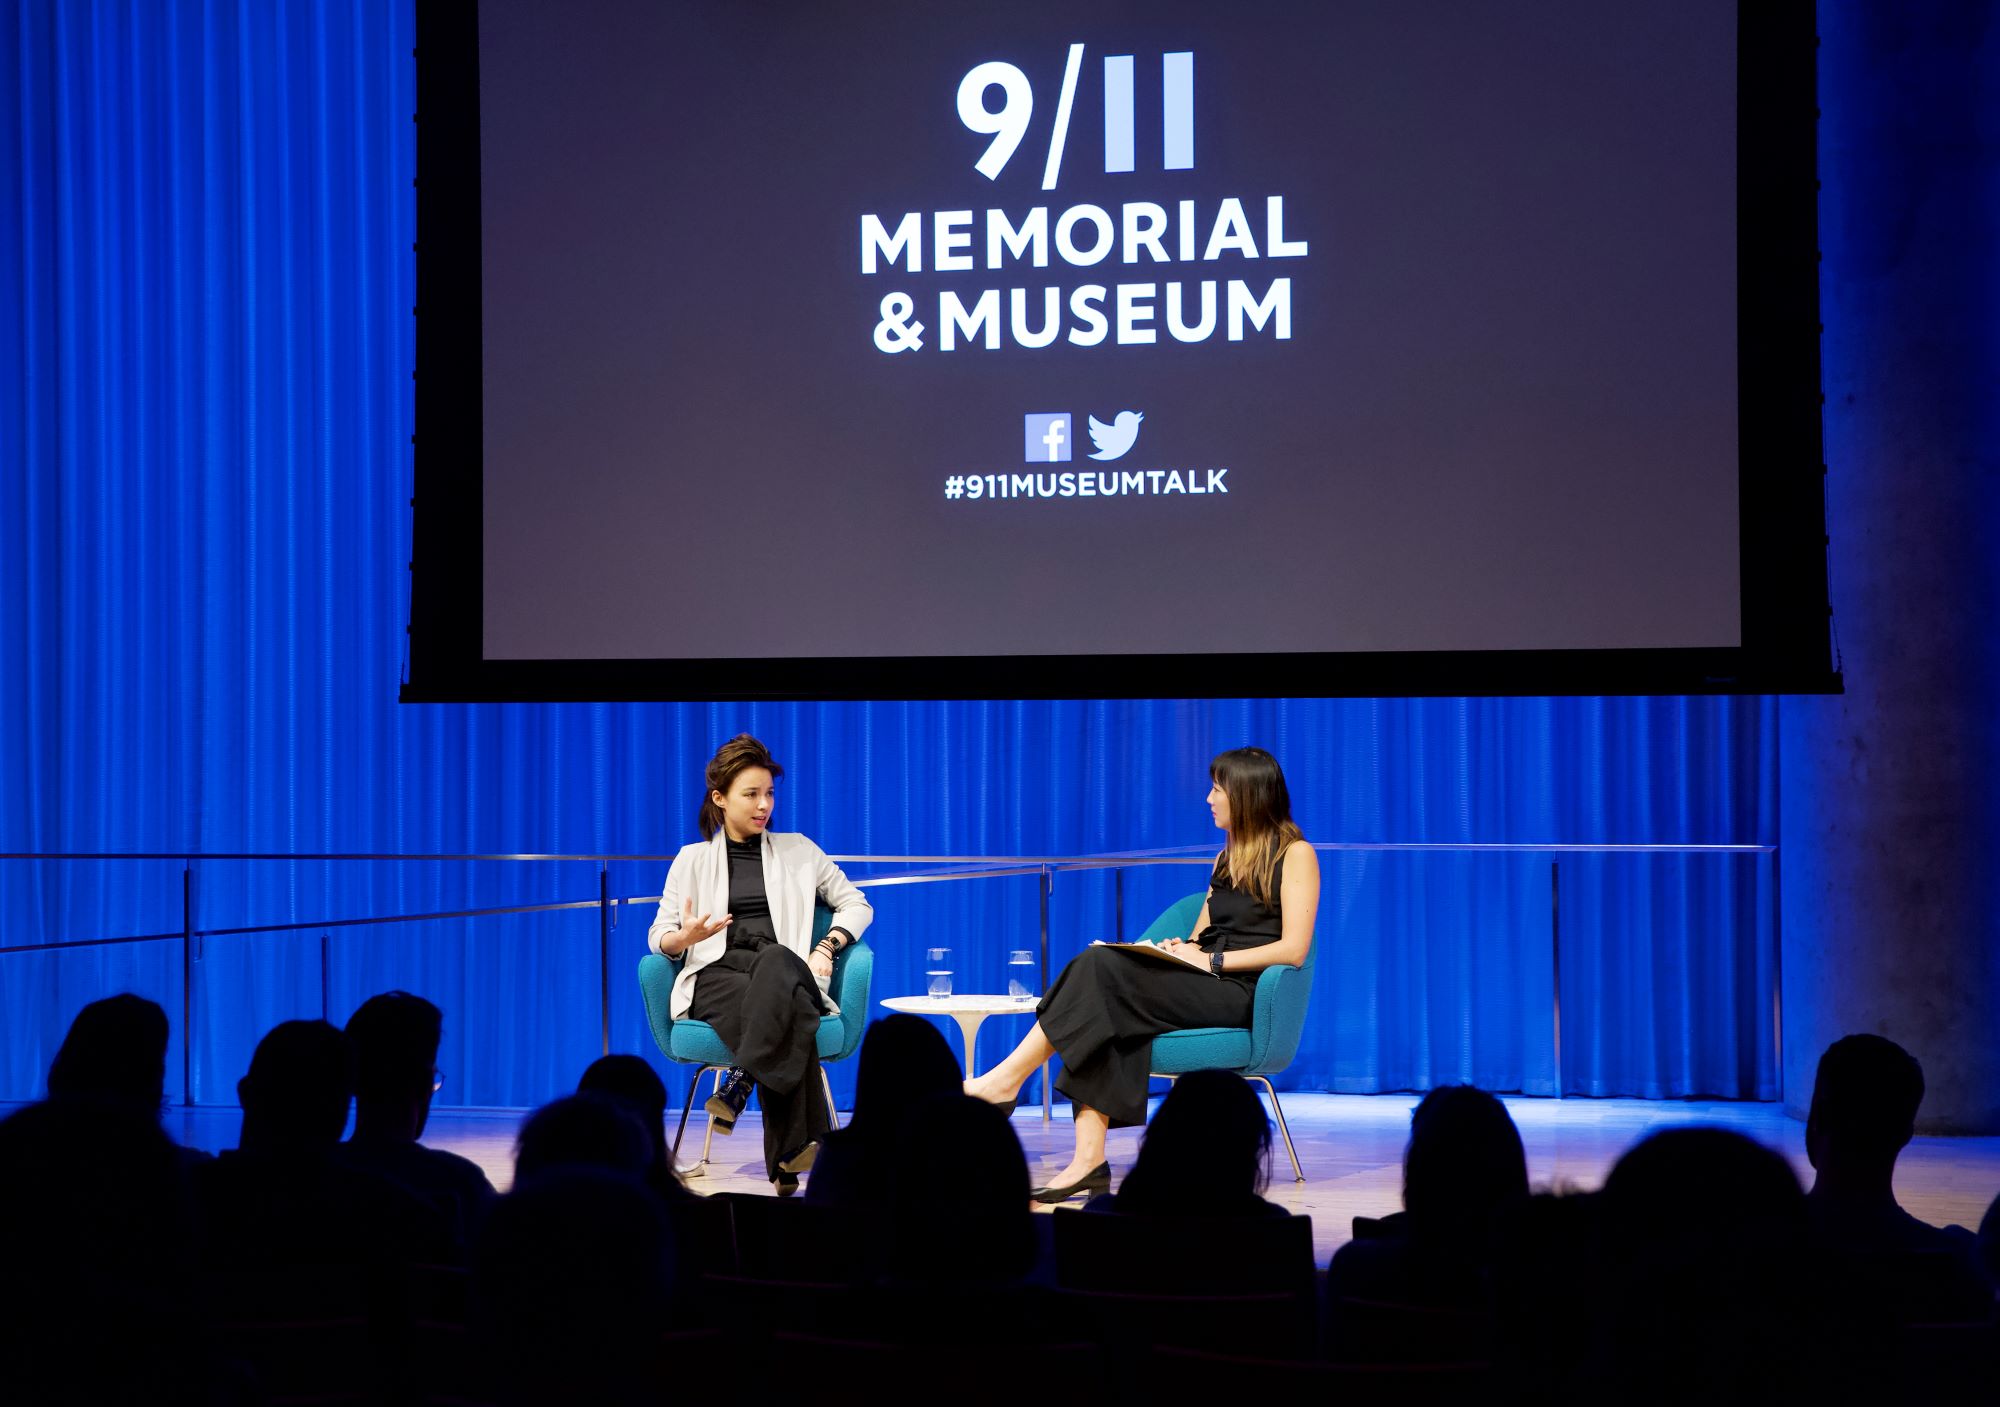 VICE correspondent Isobel Yeung speaks onstage as she sits with a woman hosting a public program at the Museum Auditorium. This wide-angle photo includes audience members in the foreground who are silhouetted by the light onstage. A projector screen has been lowered above the two women onstage.